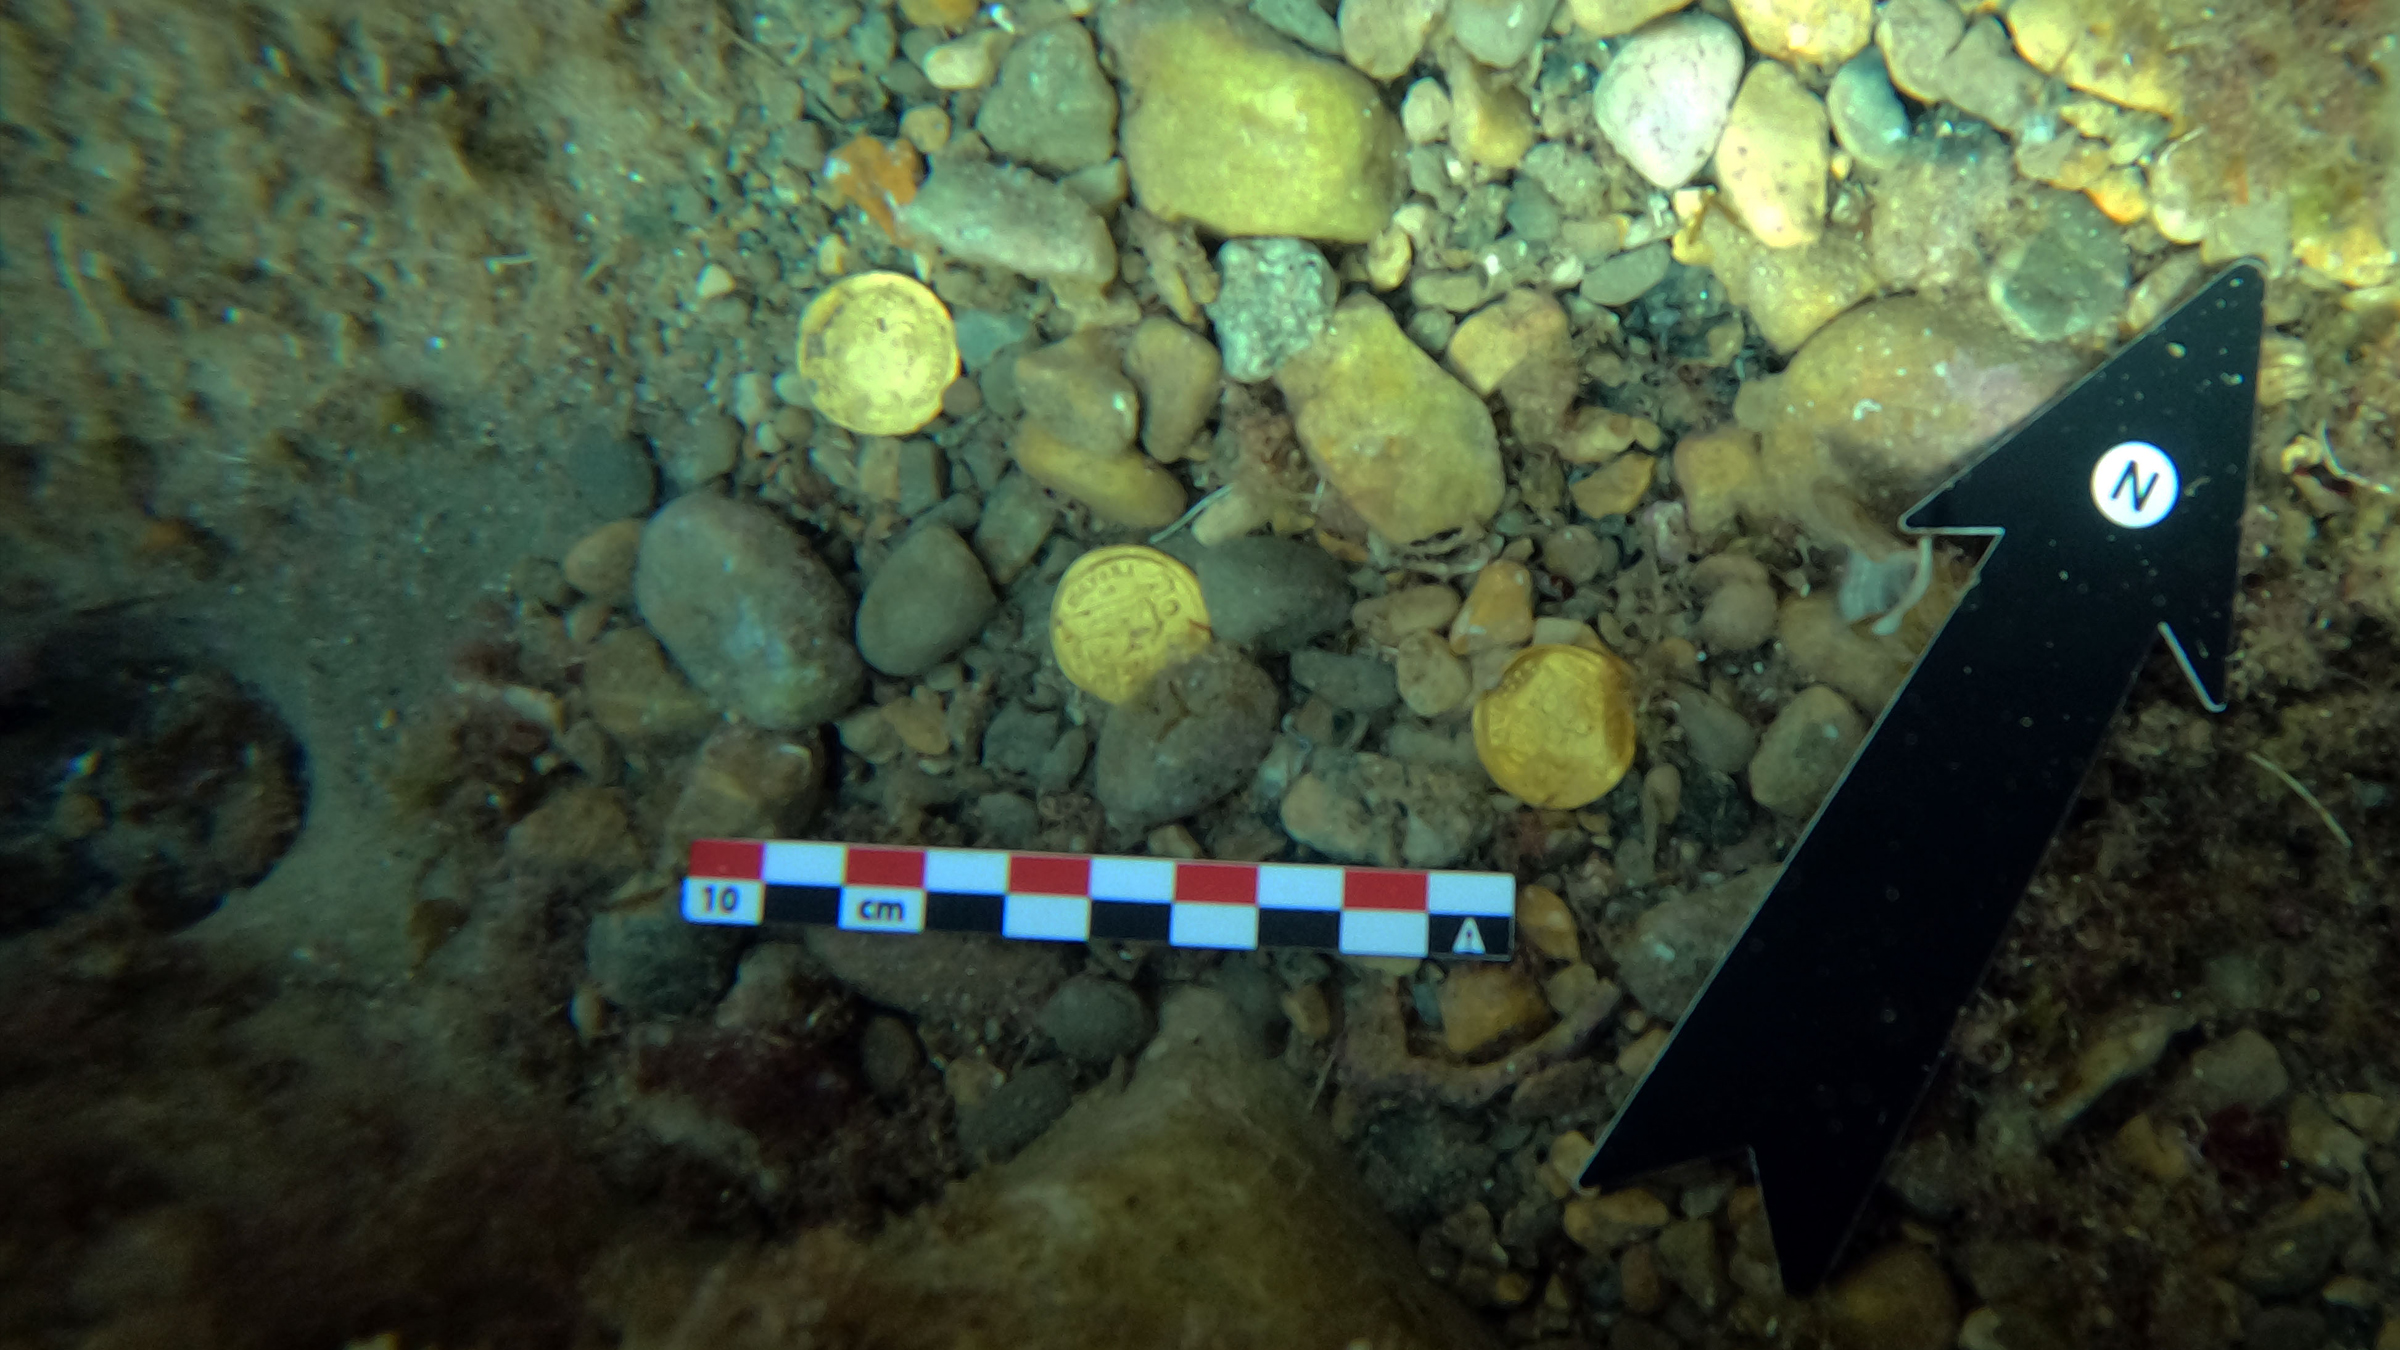 Amateur freedivers find gold treasure dating to the fall of the Roman Empire | Live Science